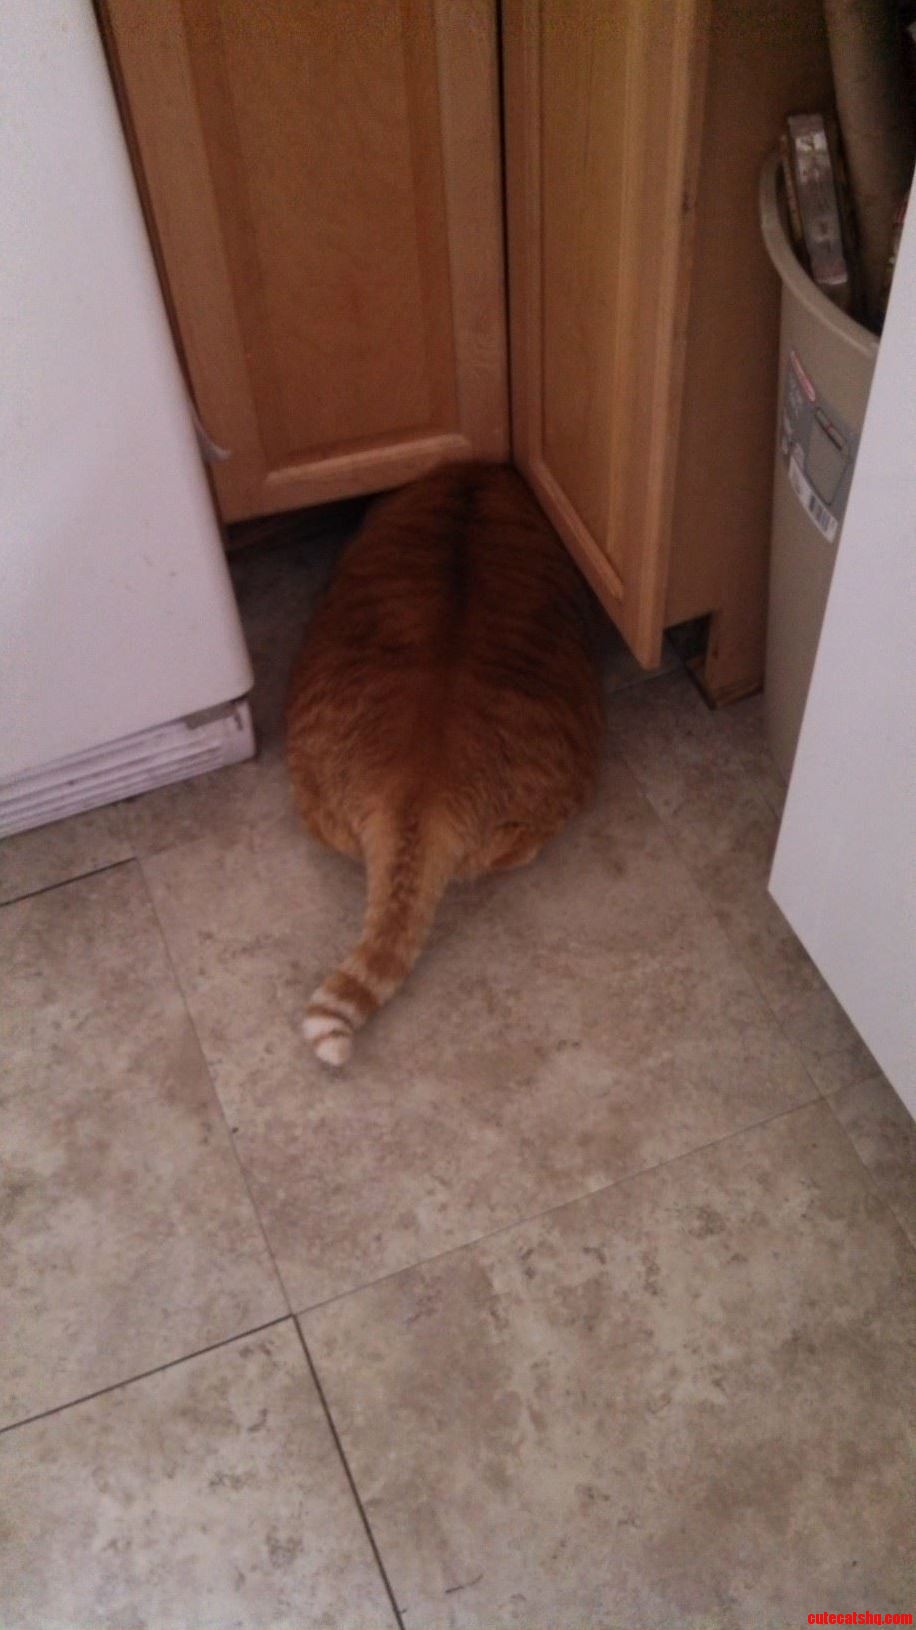 My 25Lb Cat Trying To Get Under A Cabinet